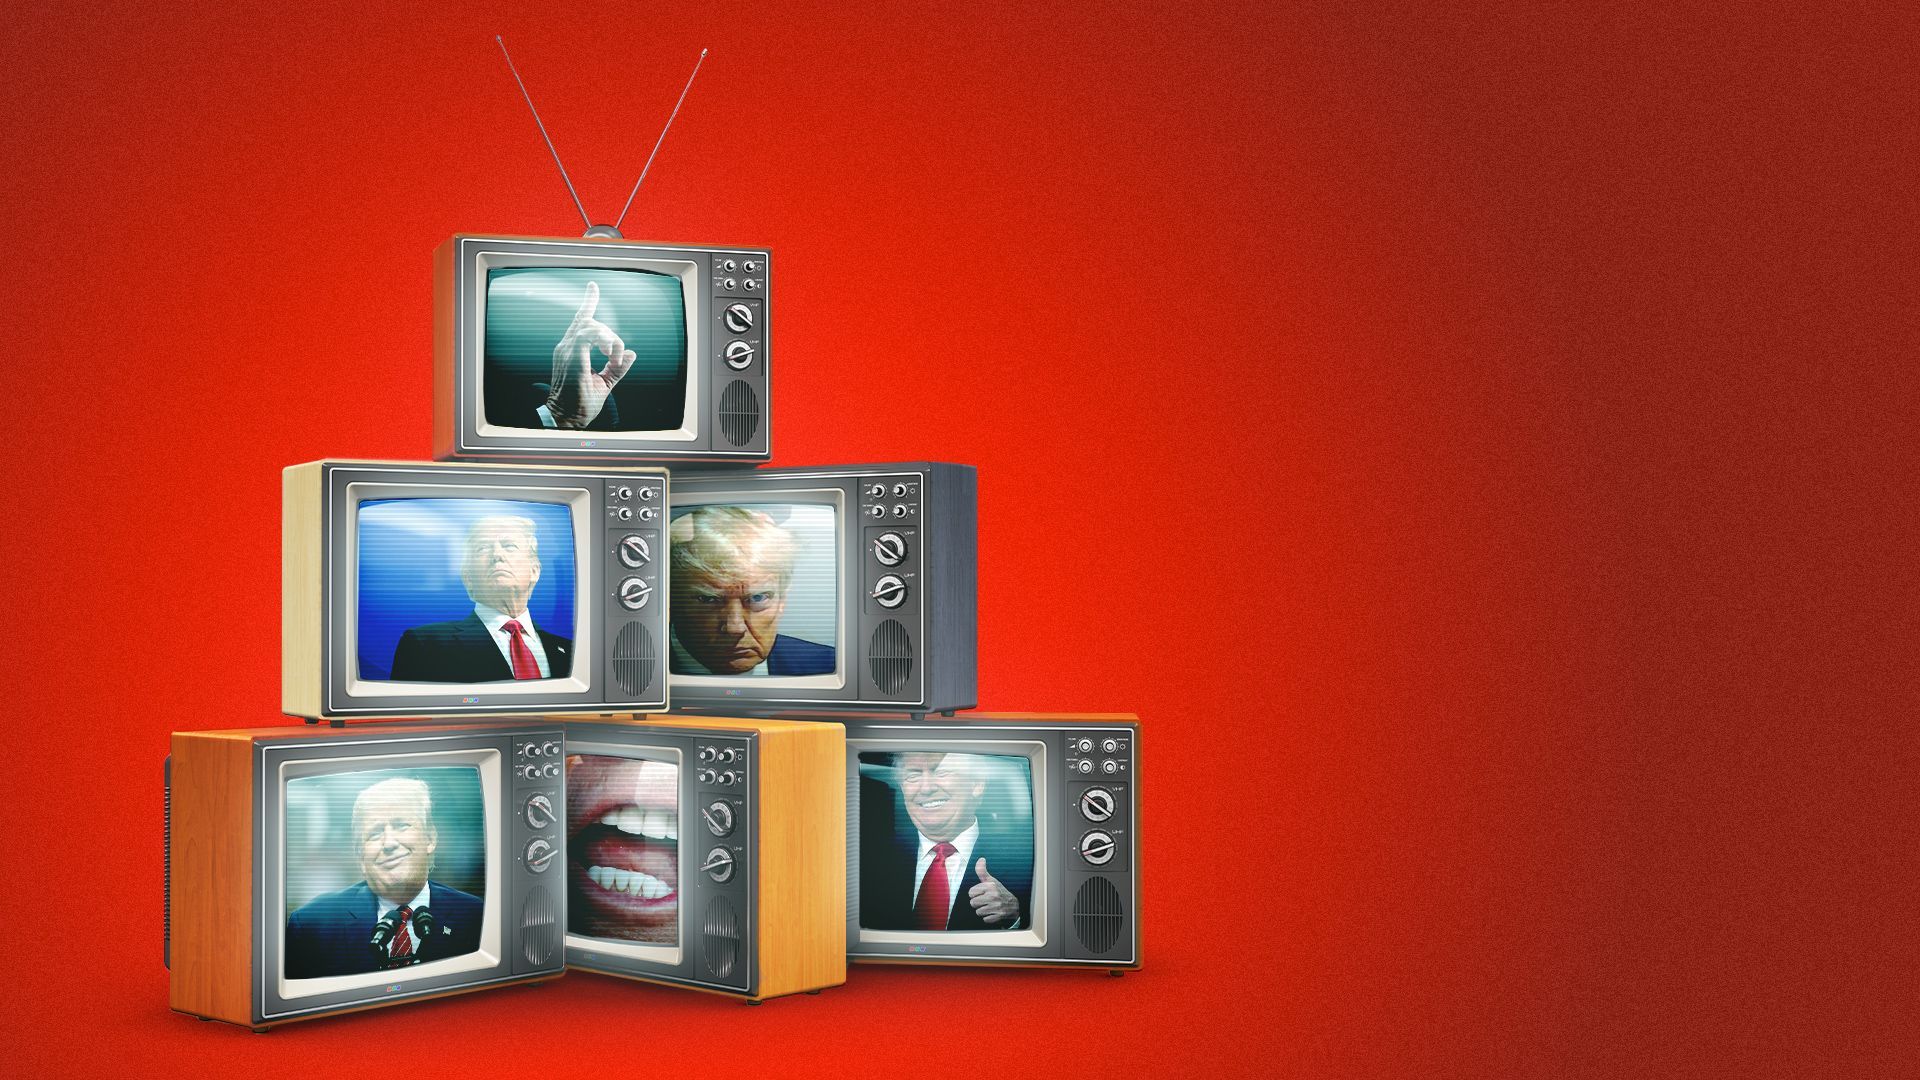 Photo illustration of a stack of televisions showing various images of Donald Trump on the screens.